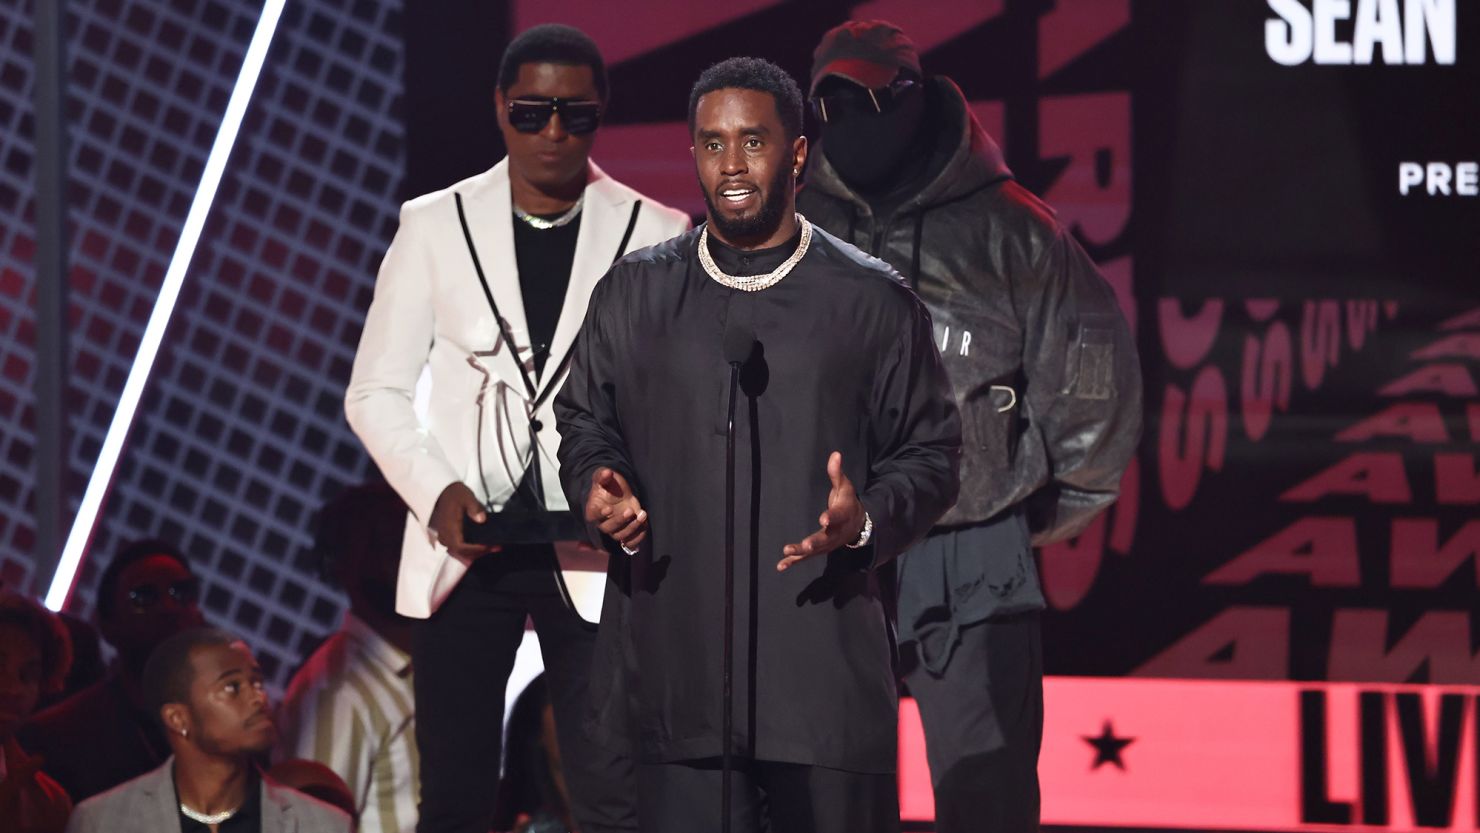 Babyface and Kanye West presented Sean "Diddy" Combs a lifetime achievement award at the BET Awards on June 26, 2022.